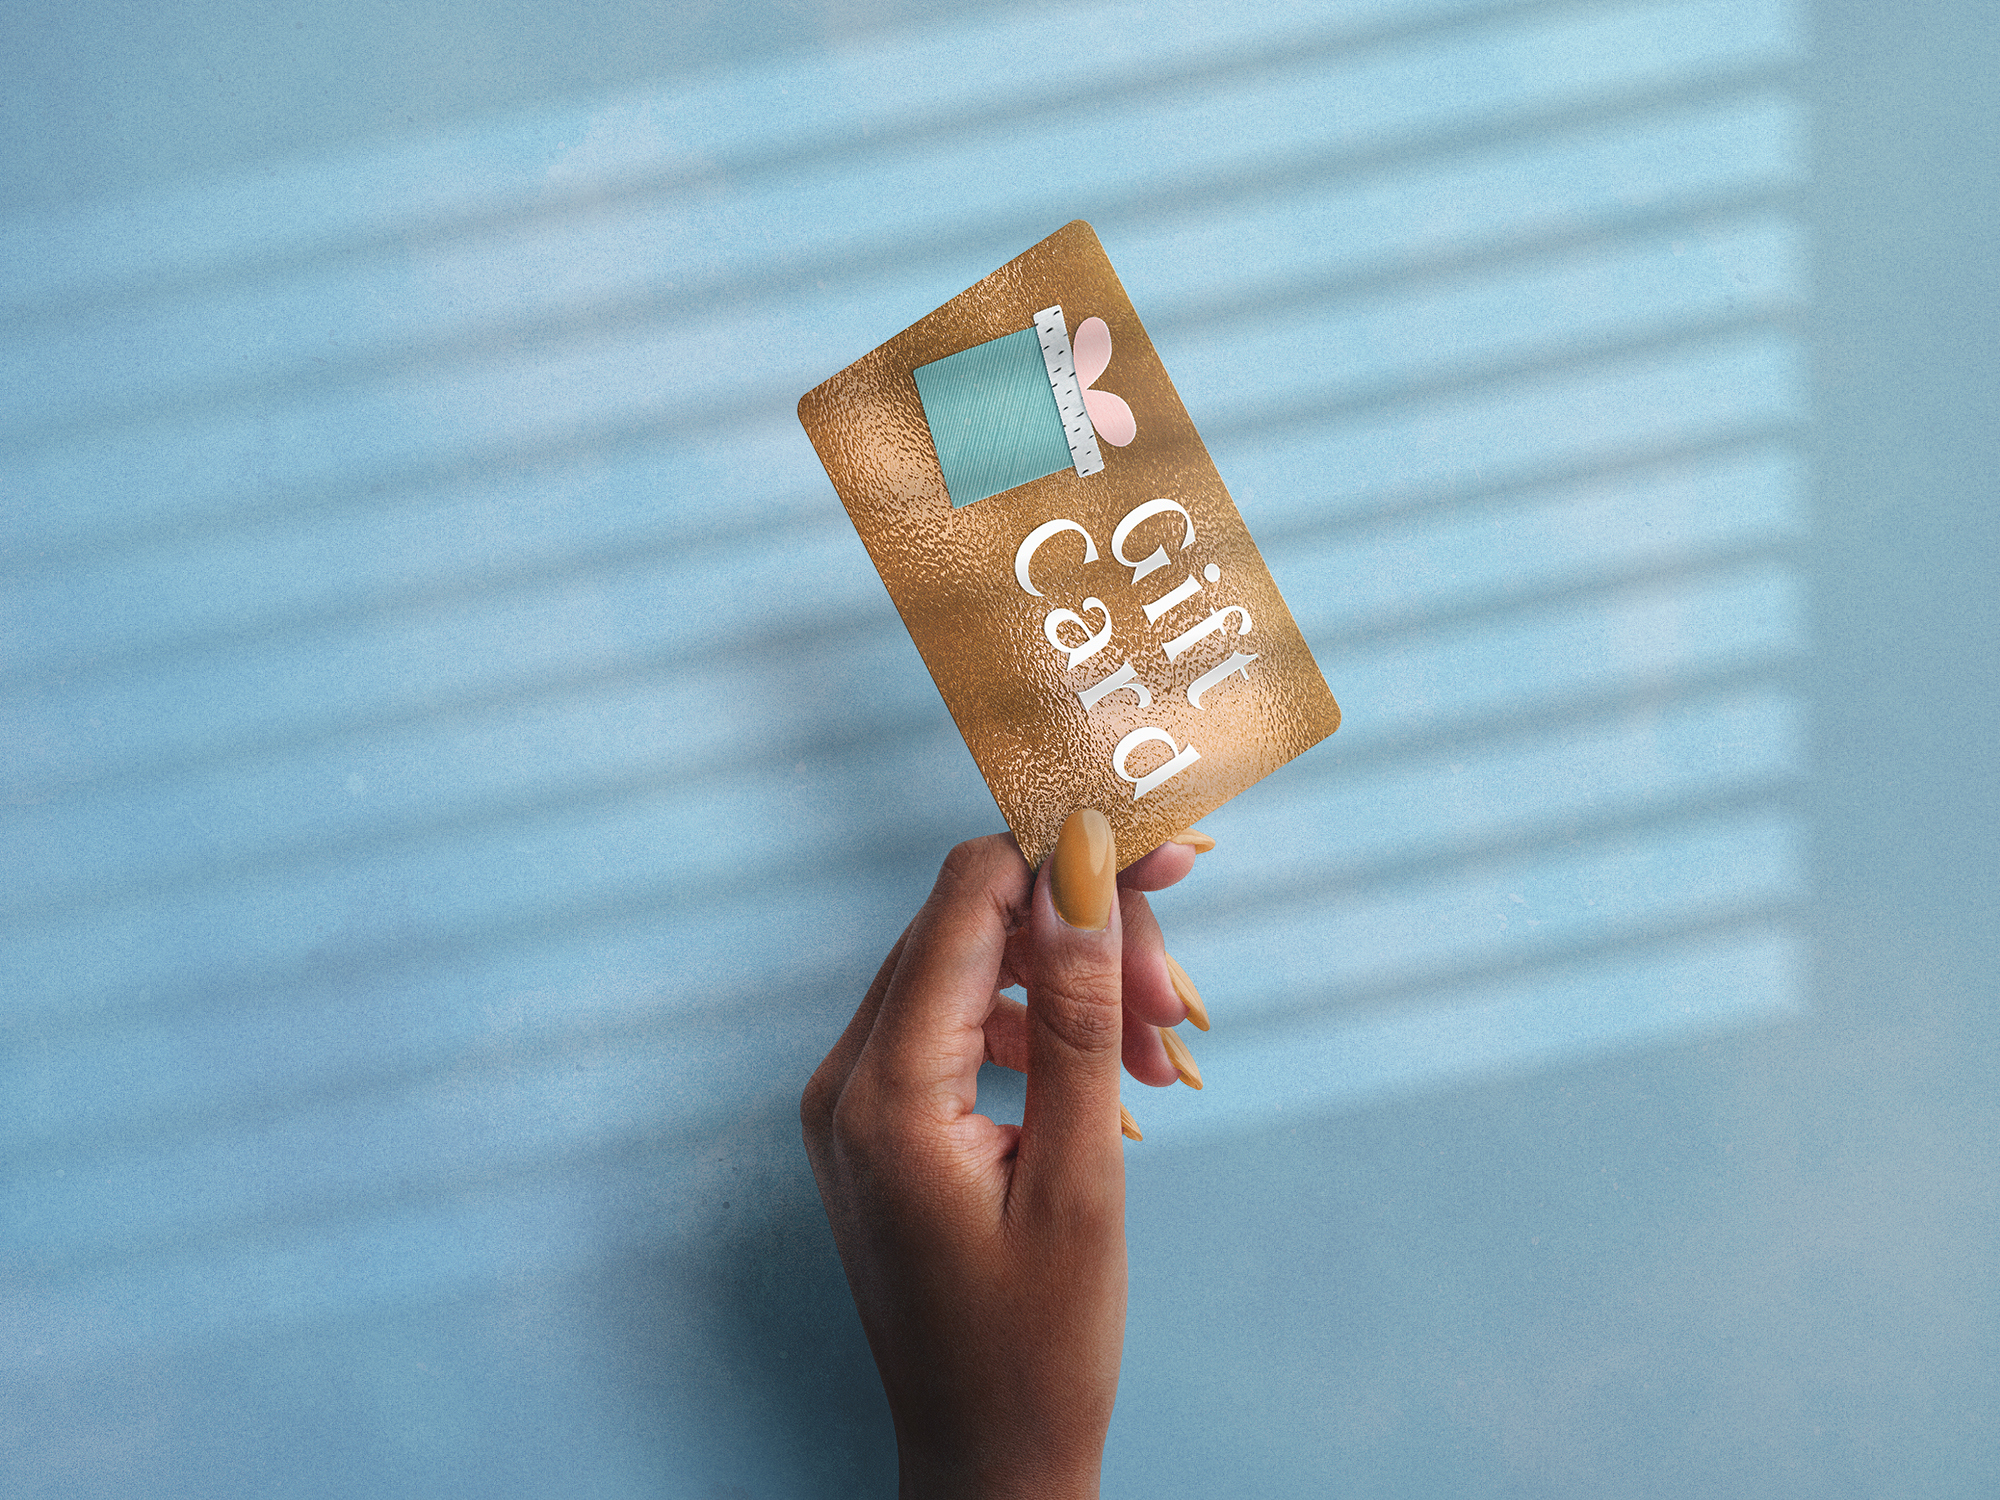 A woman holding up a gift card | Source: Getty Images